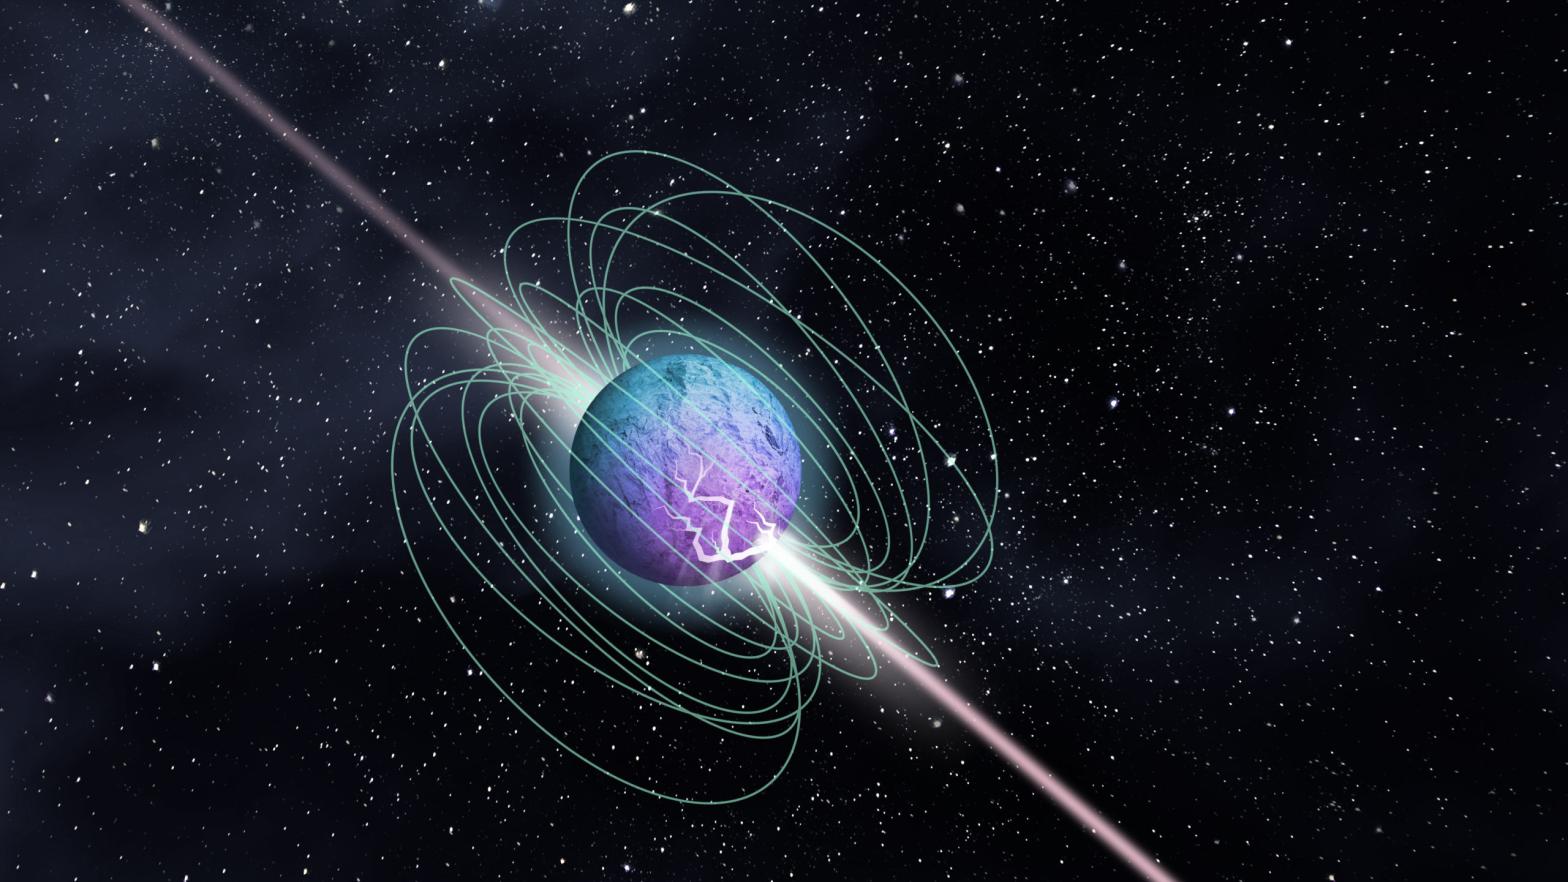 Artist's impression of a magnetar outburst, showing the object's magnetic field and bi-directional beamed emission, having burst out from a crust cracking episode.  (Image: McGill University Graphic Design Team)